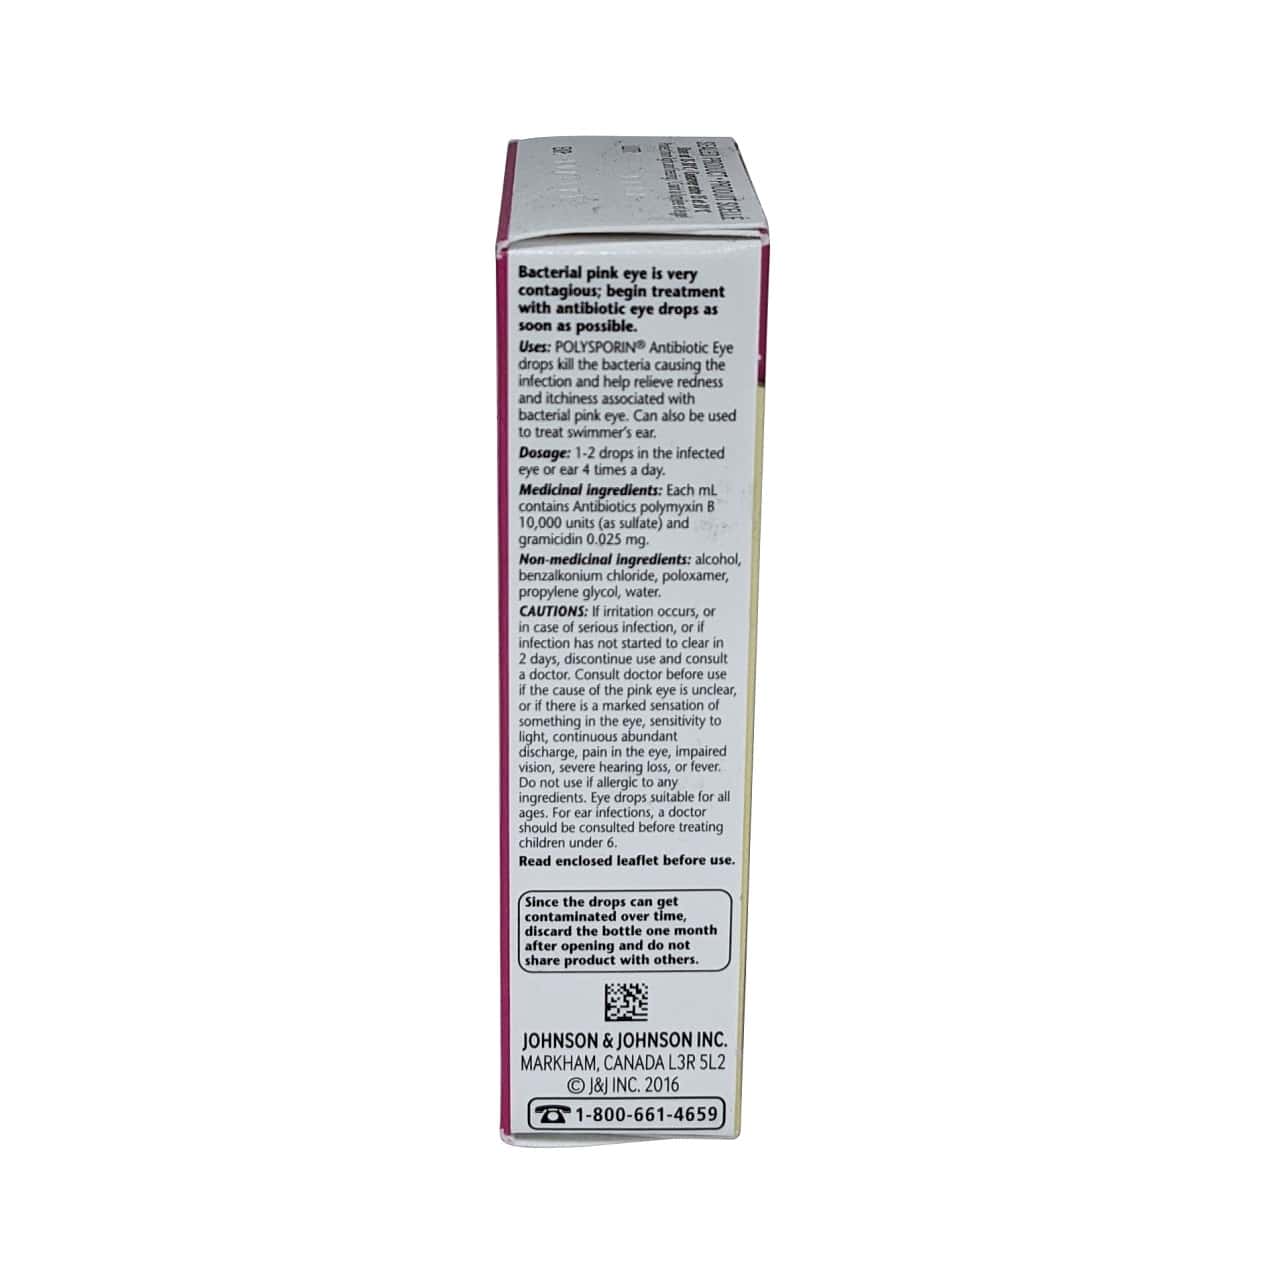 Description, uses, dosage, ingredients, and cautions for Polysporin Antibiotic Eye Drops (15 mL) in English